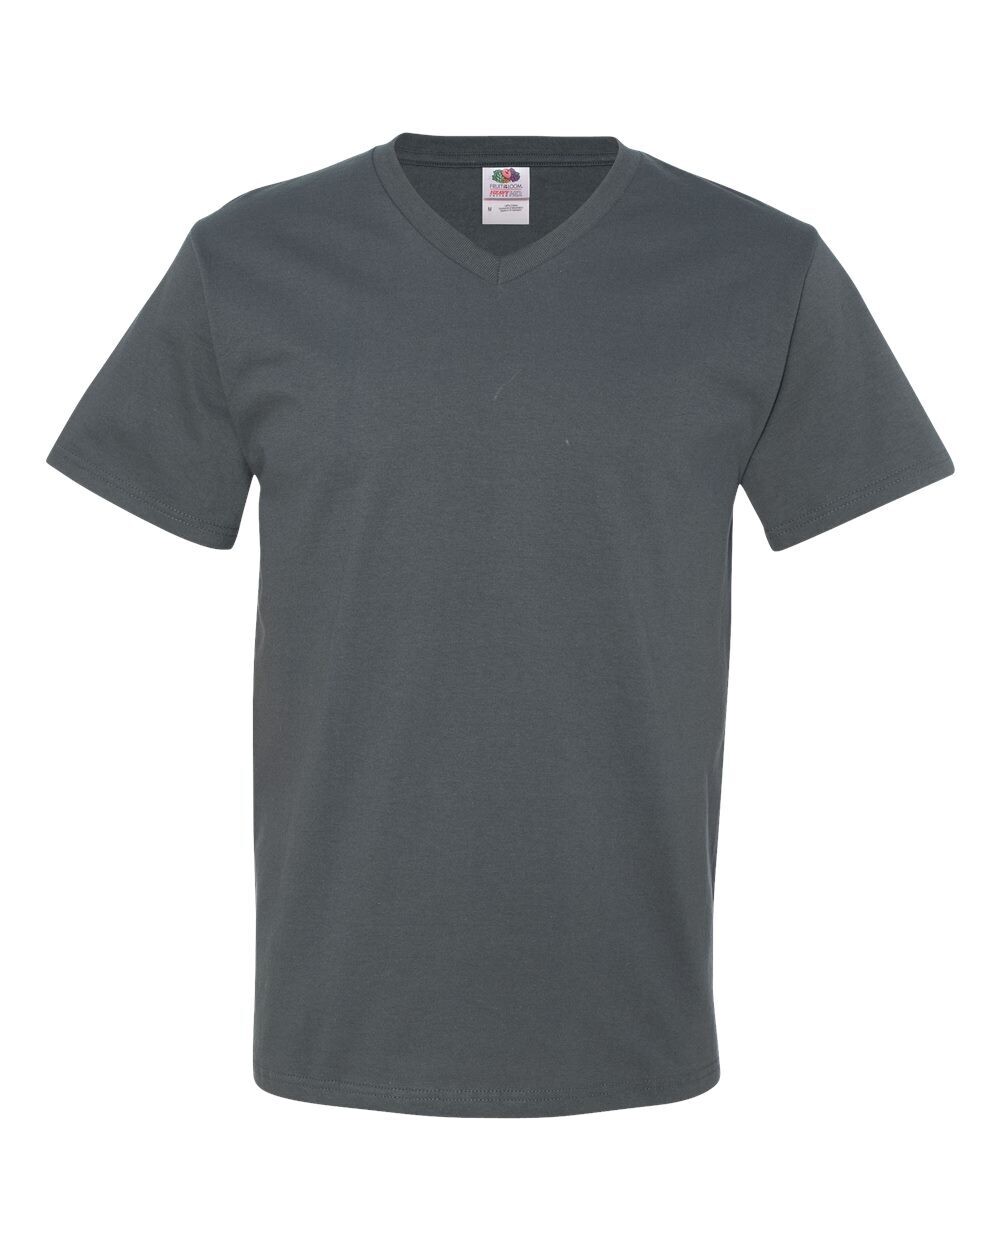 Fruit of the Loom - HD Cotton V-Neck T-Shirt - 39VR